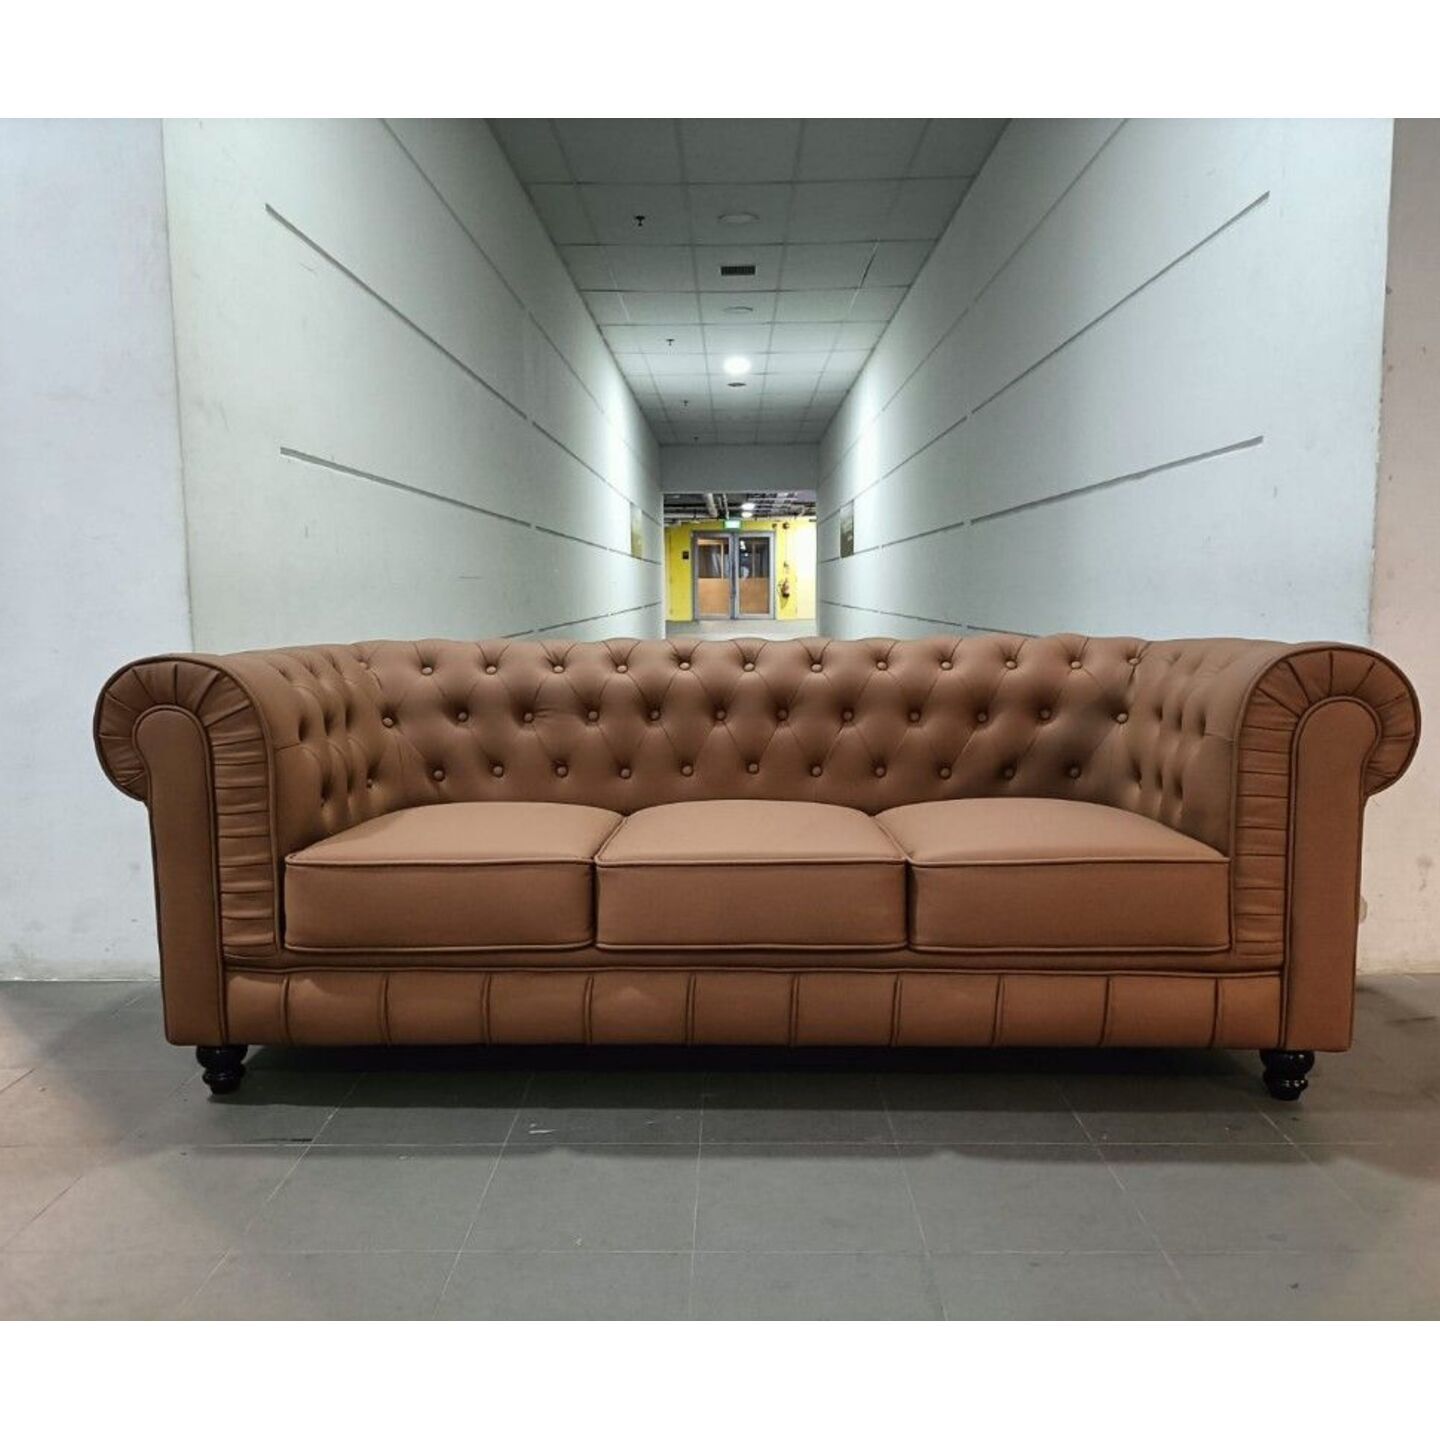 STAR BUY - CAT FRIENDLY SALVADO II 3 Seater Chesterfield Sofa in CAPPUCCINO BROWN TECH LEATHER